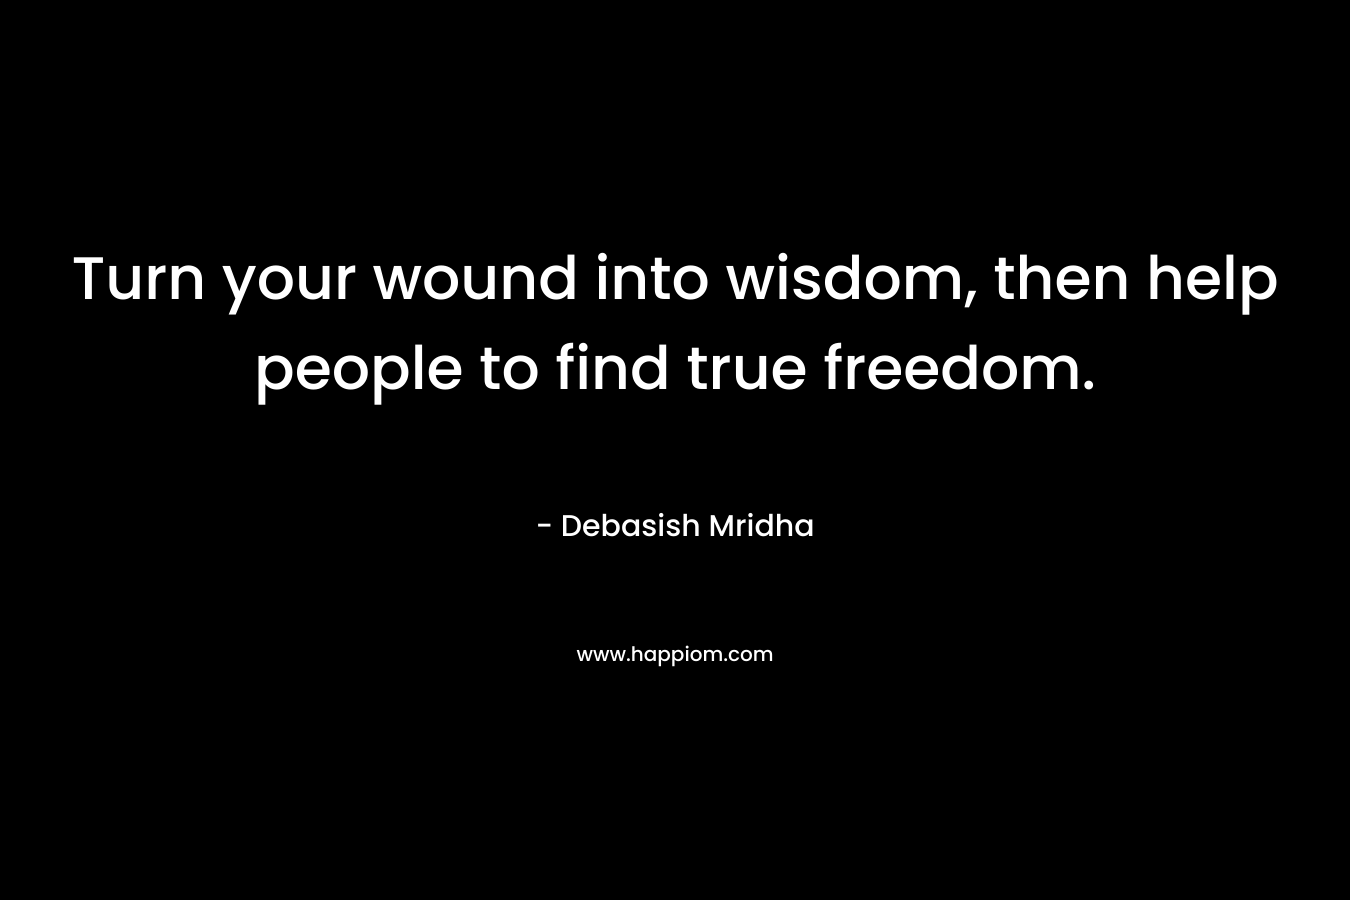 Turn your wound into wisdom, then help people to find true freedom. – Debasish Mridha